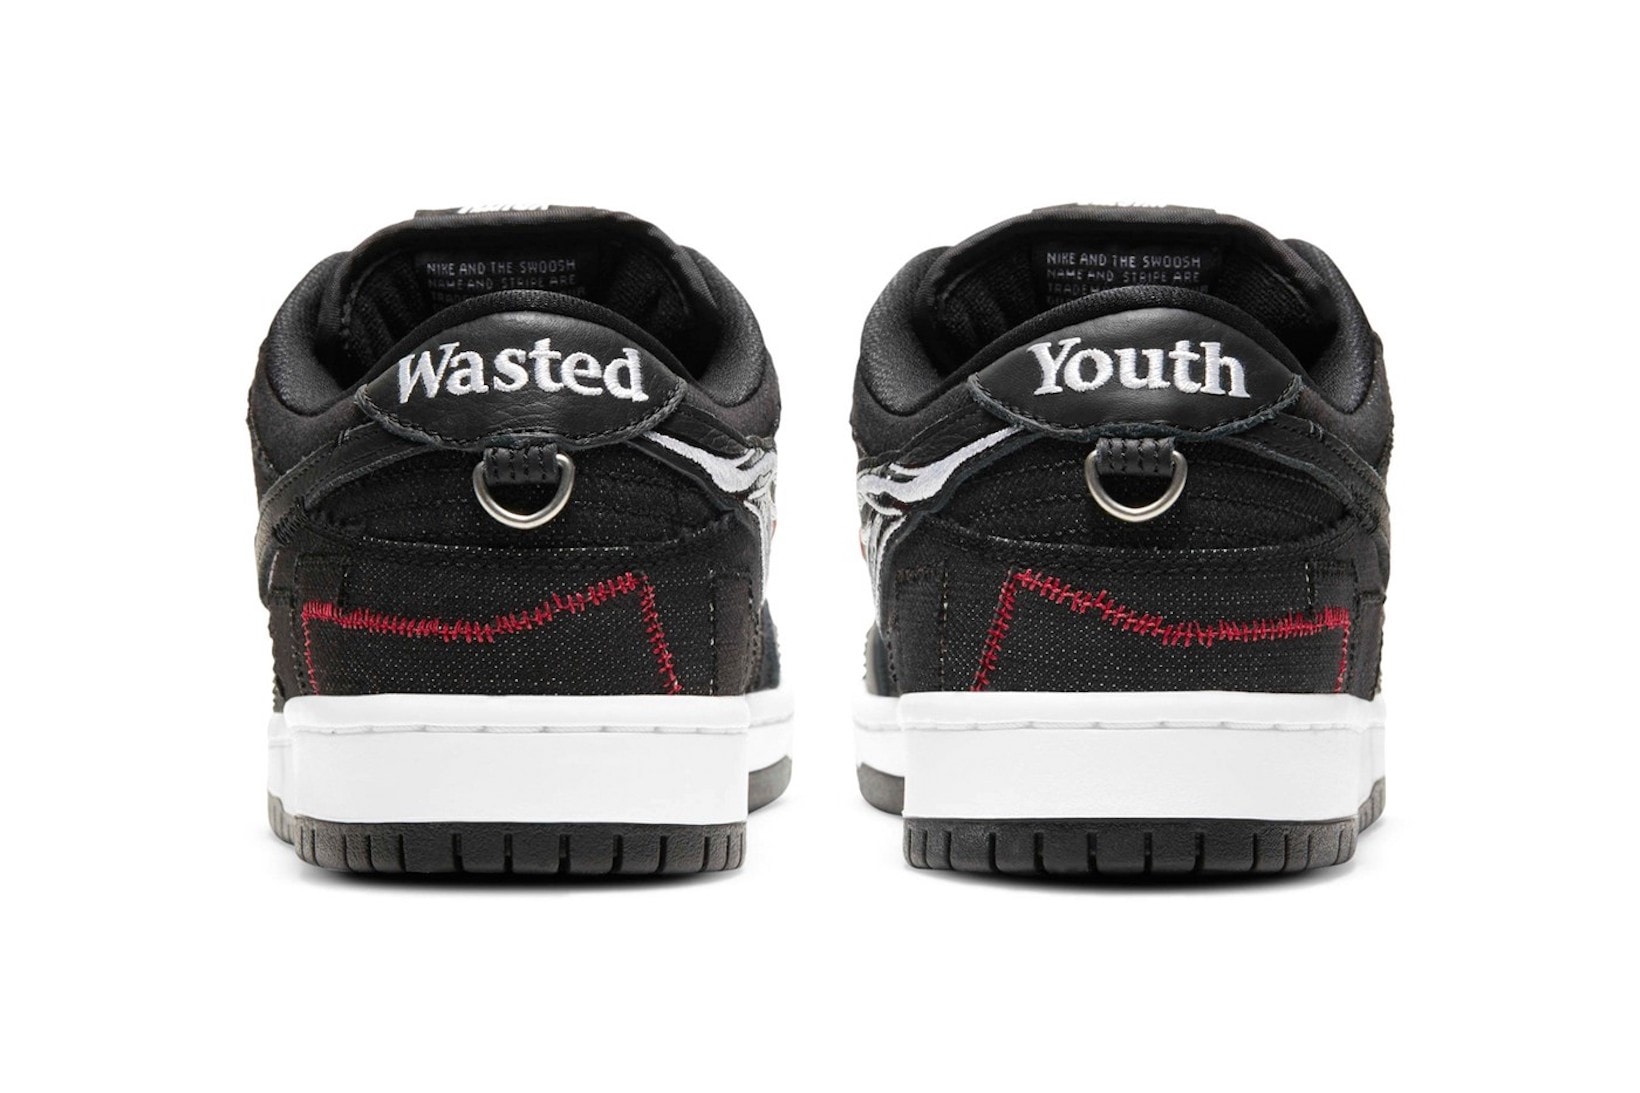 nike verdy sb dunk low wasted youth sneakers collaboration black white rose kicks shoes sneakerhead footwear heel